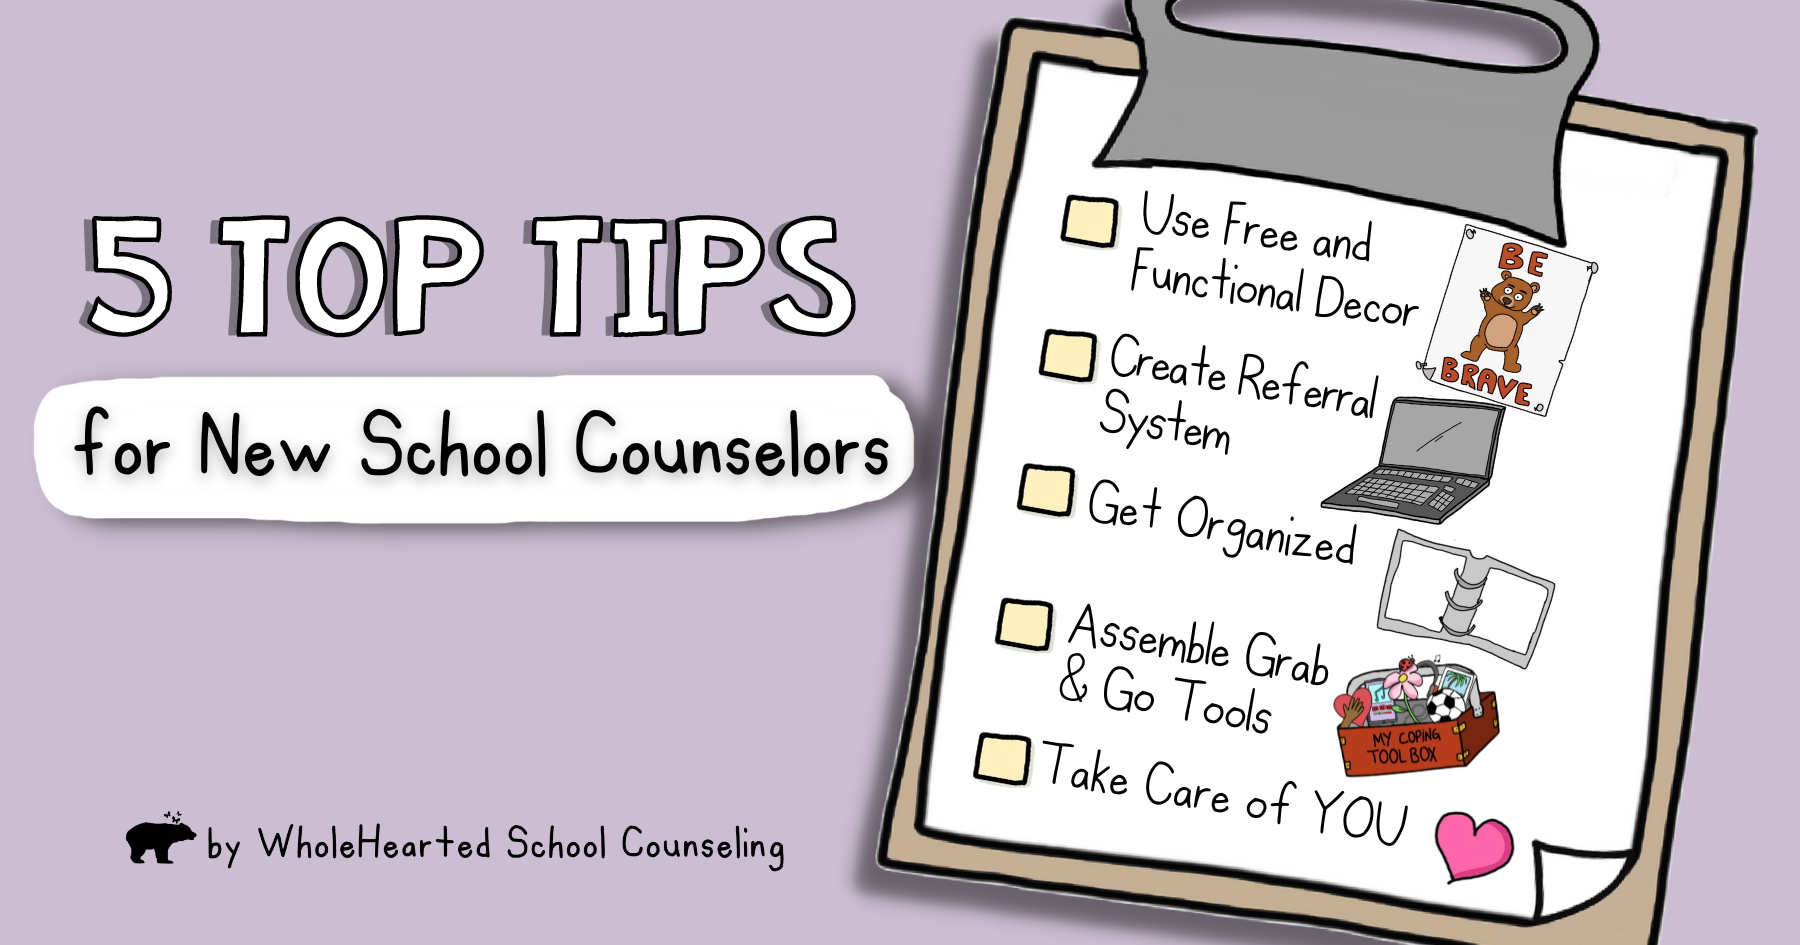 Clipboard illustration with list of 5 tips for new school counselors.